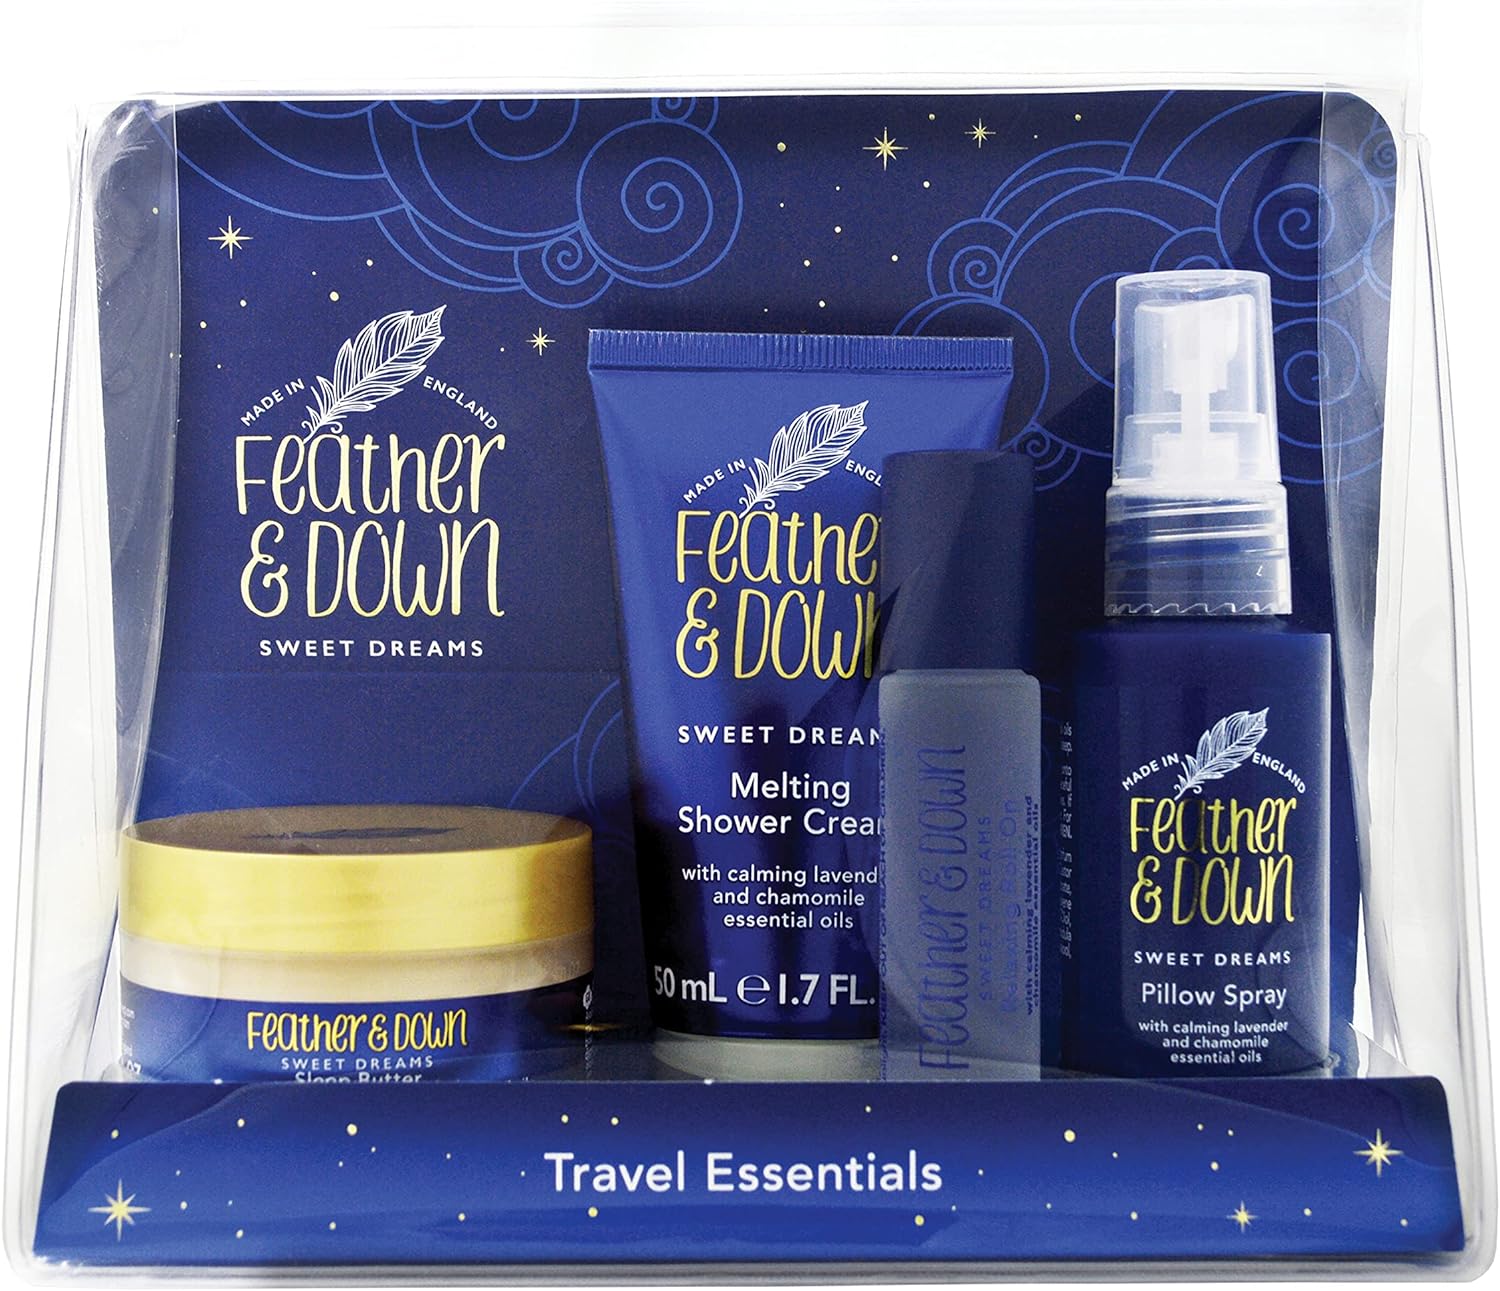 Feather & Down Travel Essentials Gift Set (Pillow Spray, Melting Shower Cream, Sleep Butter & Relaxing Roll-On) - Infused with Lavender & Chamomile Essential Oils. Vegan Friendly & Cruelty Free.